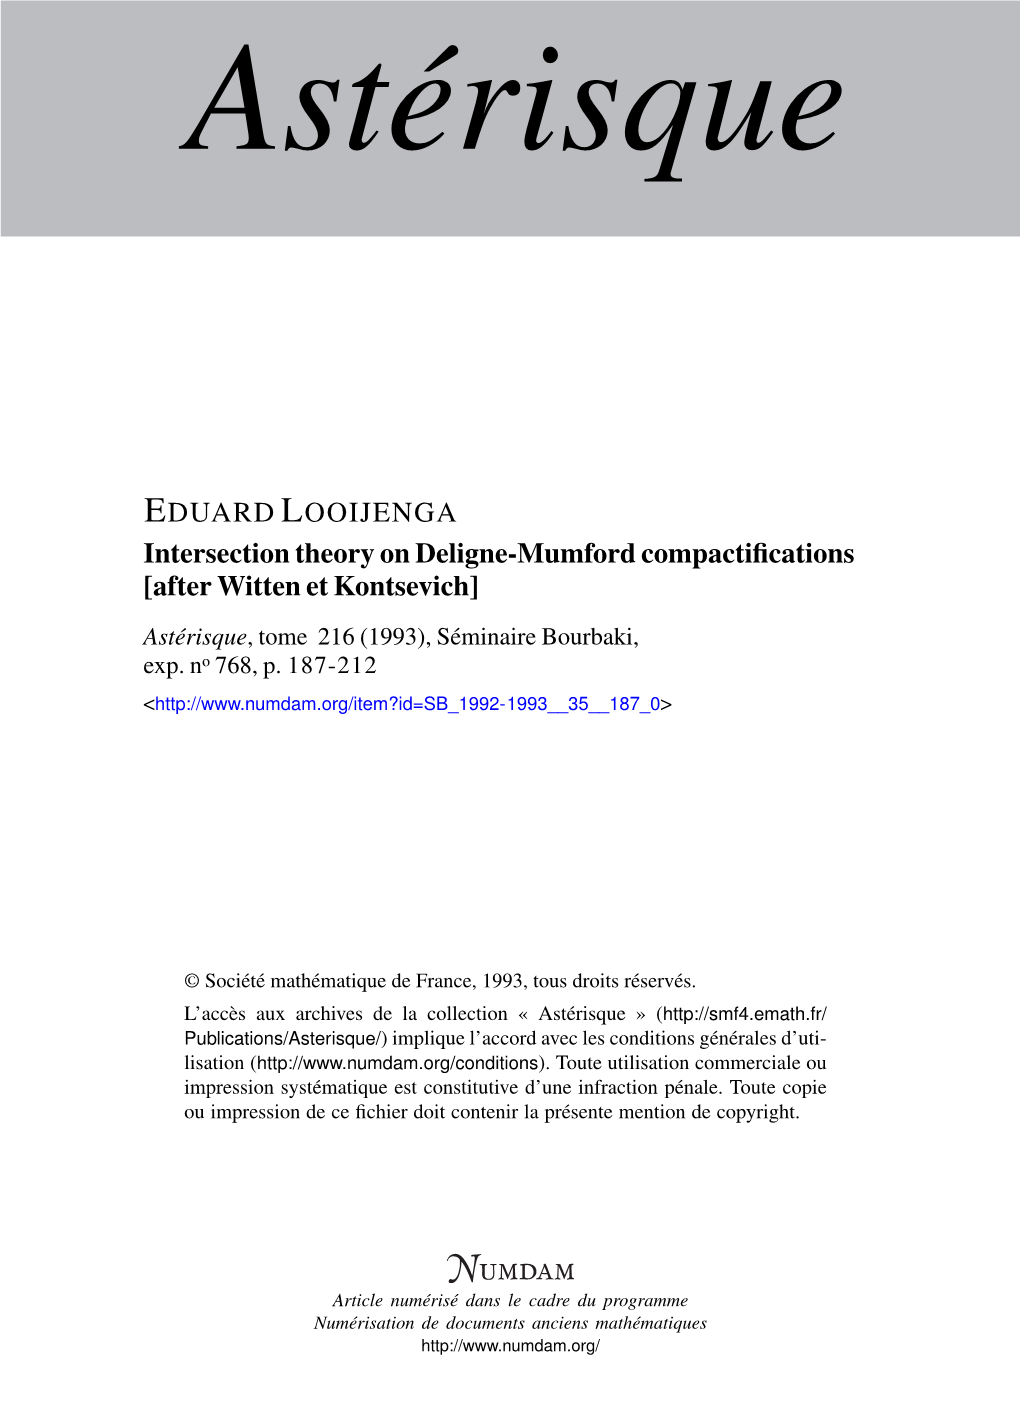 Intersection Theory on Deligne-Mumford Compactiﬁcations [After Witten Et Kontsevich] Astérisque, Tome 216 (1993), Séminaire Bourbaki, Exp